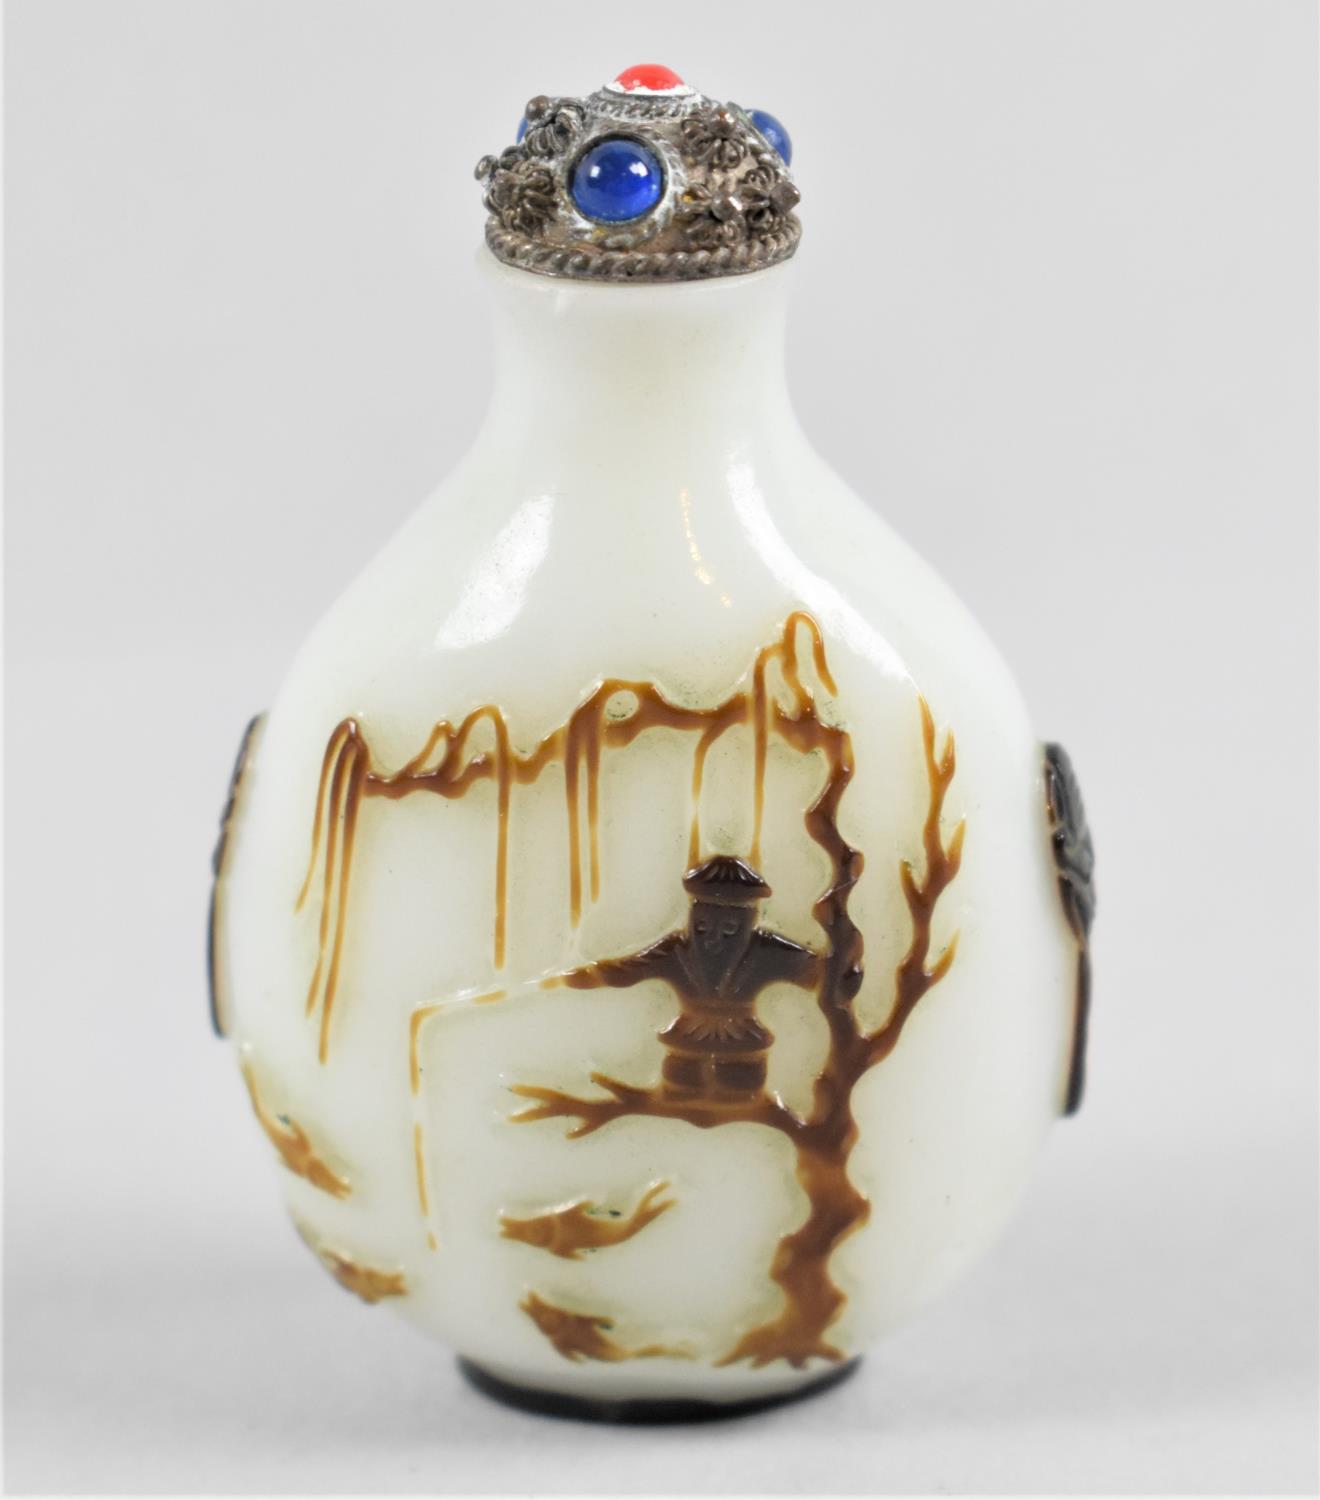 A Chinese Carved Peking Glass Snuff Bottle with Relief Carving Depicting Boy and Buffalo, White - Image 2 of 3